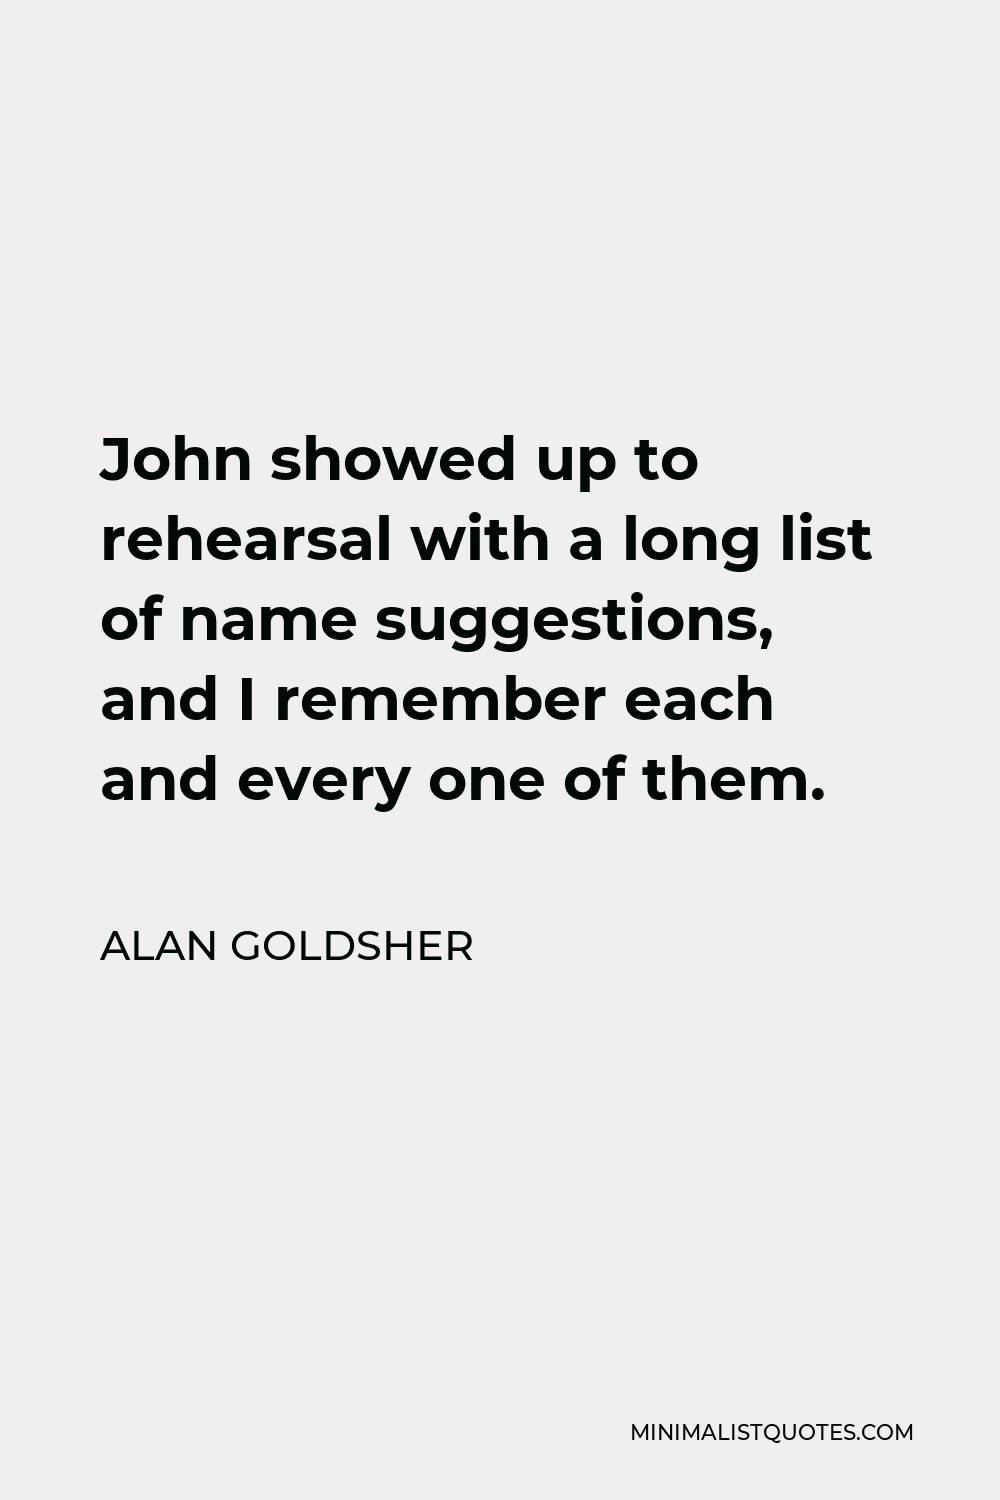 Alan Goldsher Quote - John showed up to rehearsal with a long list of name suggestions, and I remember each and every one of them.